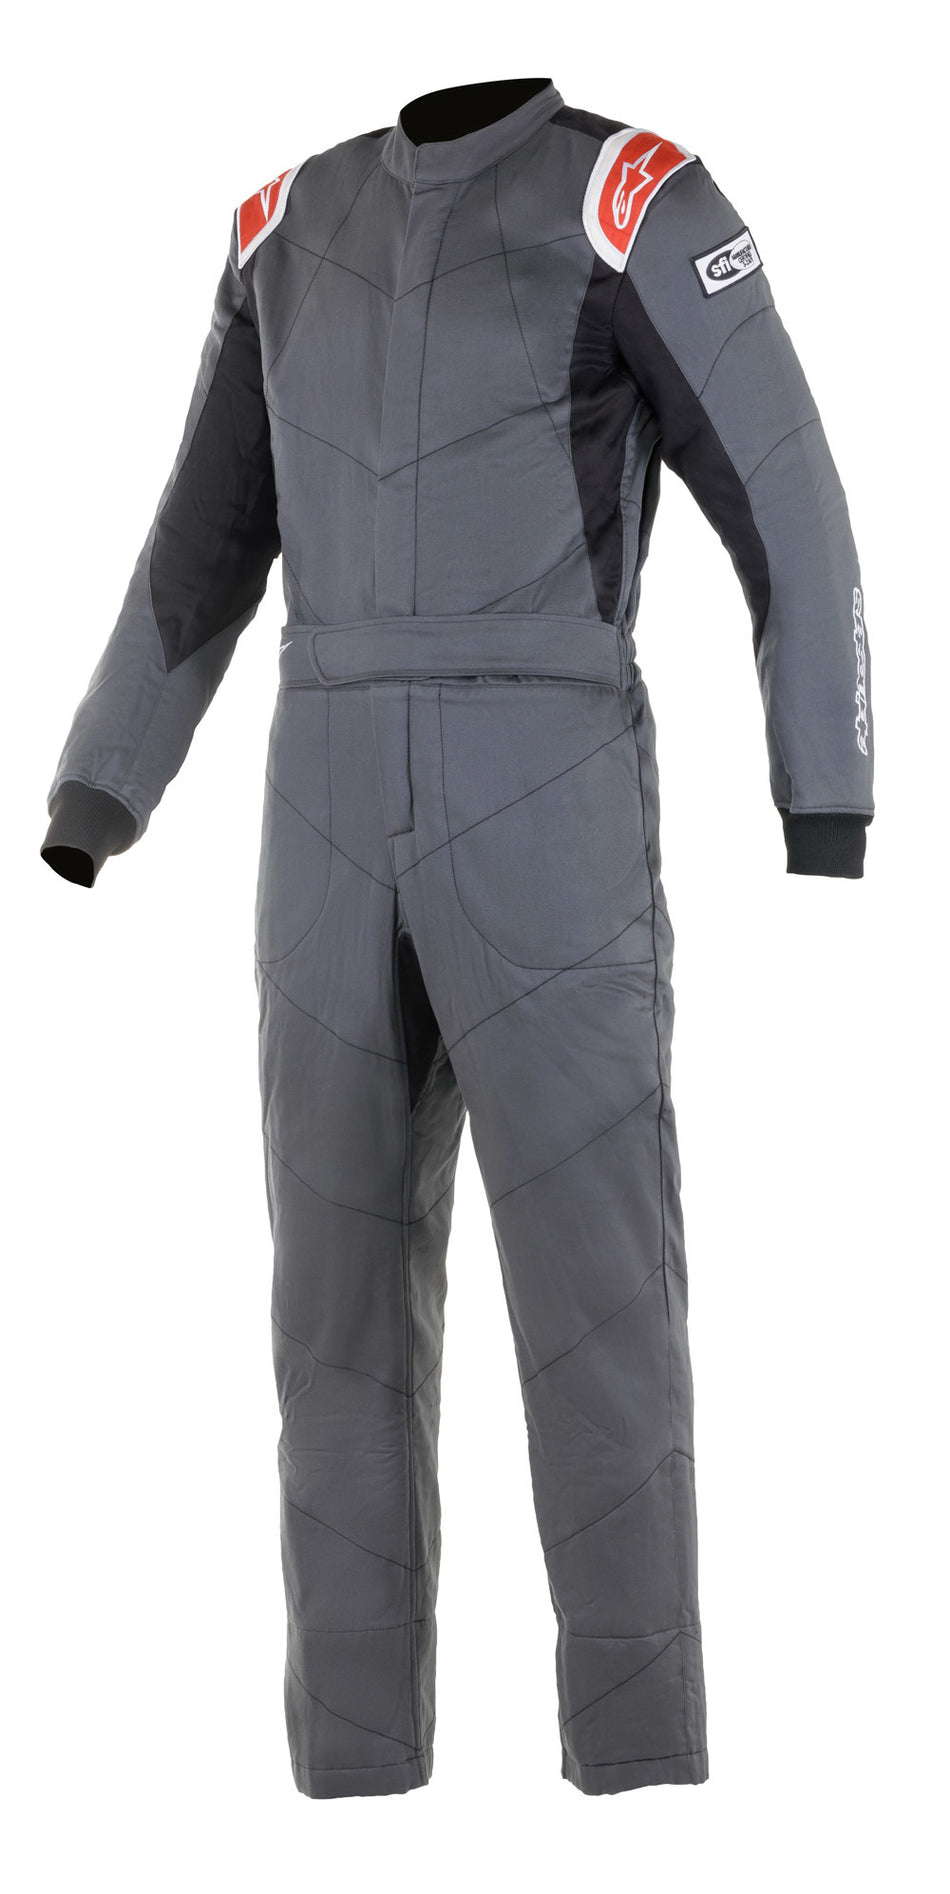 Driving Suit - Knoxville V2 - 1-Piece - SFI 3.2A/5 - Boot-Cut - Triple Layer - Fire Retardant Fabric - Gray / Red - Size 62 - X-Large / 2X-Large - Each